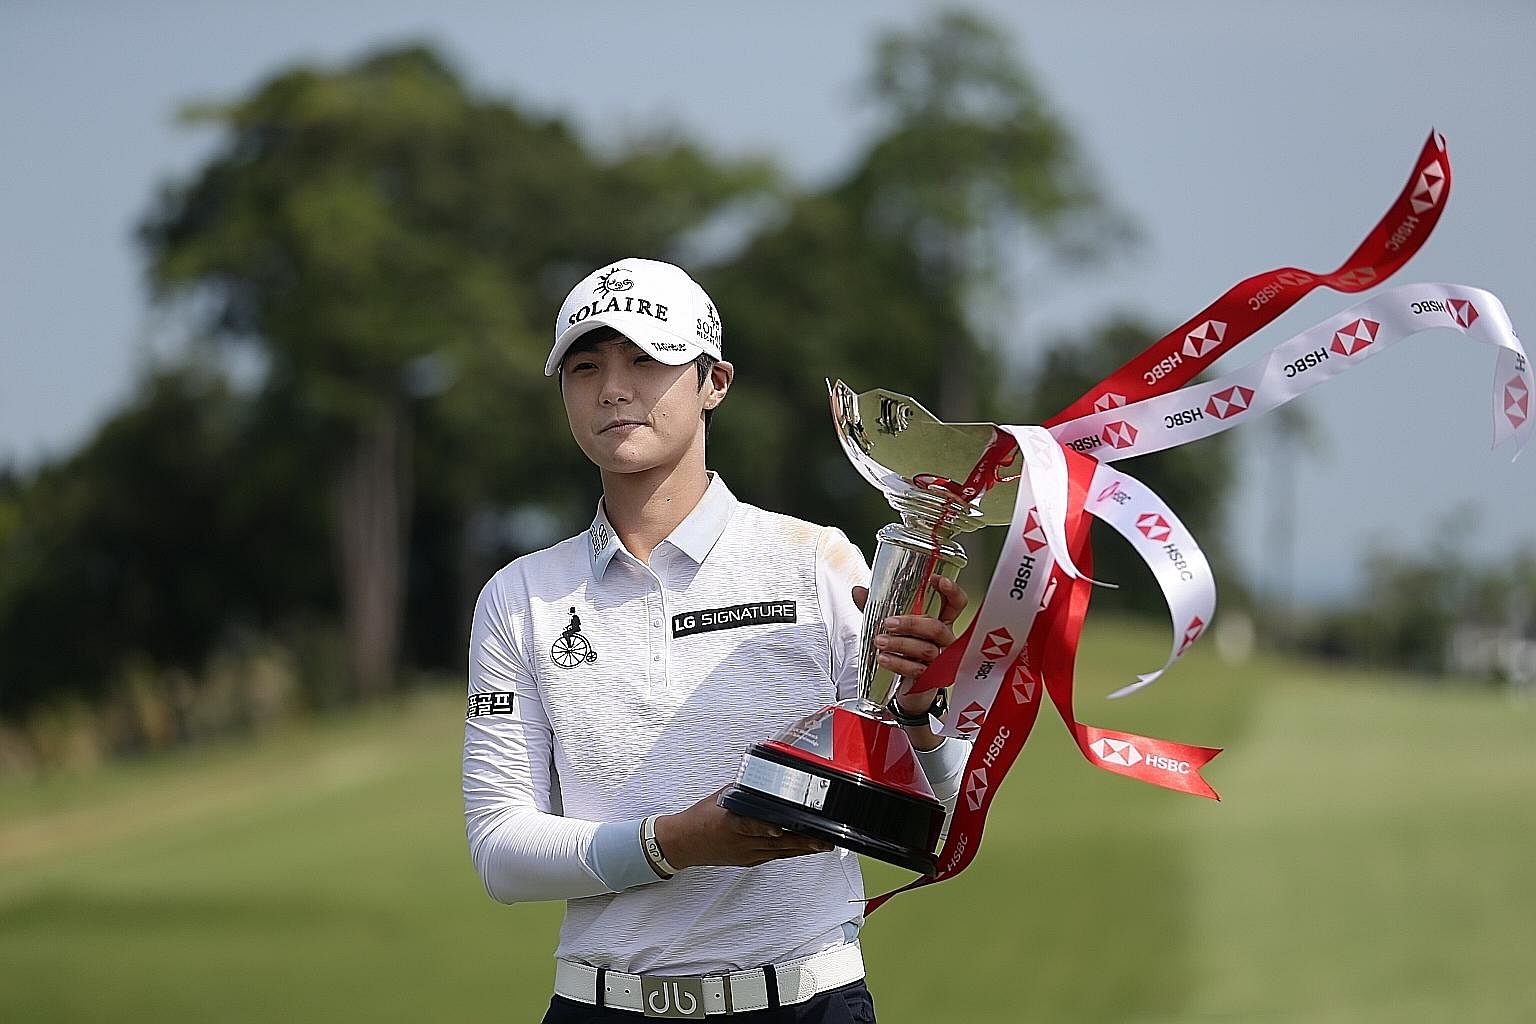 South Korean golfer Park Sung-hyun showing off her HSBC Women's World Championship trophy after firing an eight-under 64 in the final round at Sentosa Golf Club's New Tanjong Course yesterday. World No. 2 Park, 25, overcame a four-shot deficit to bea